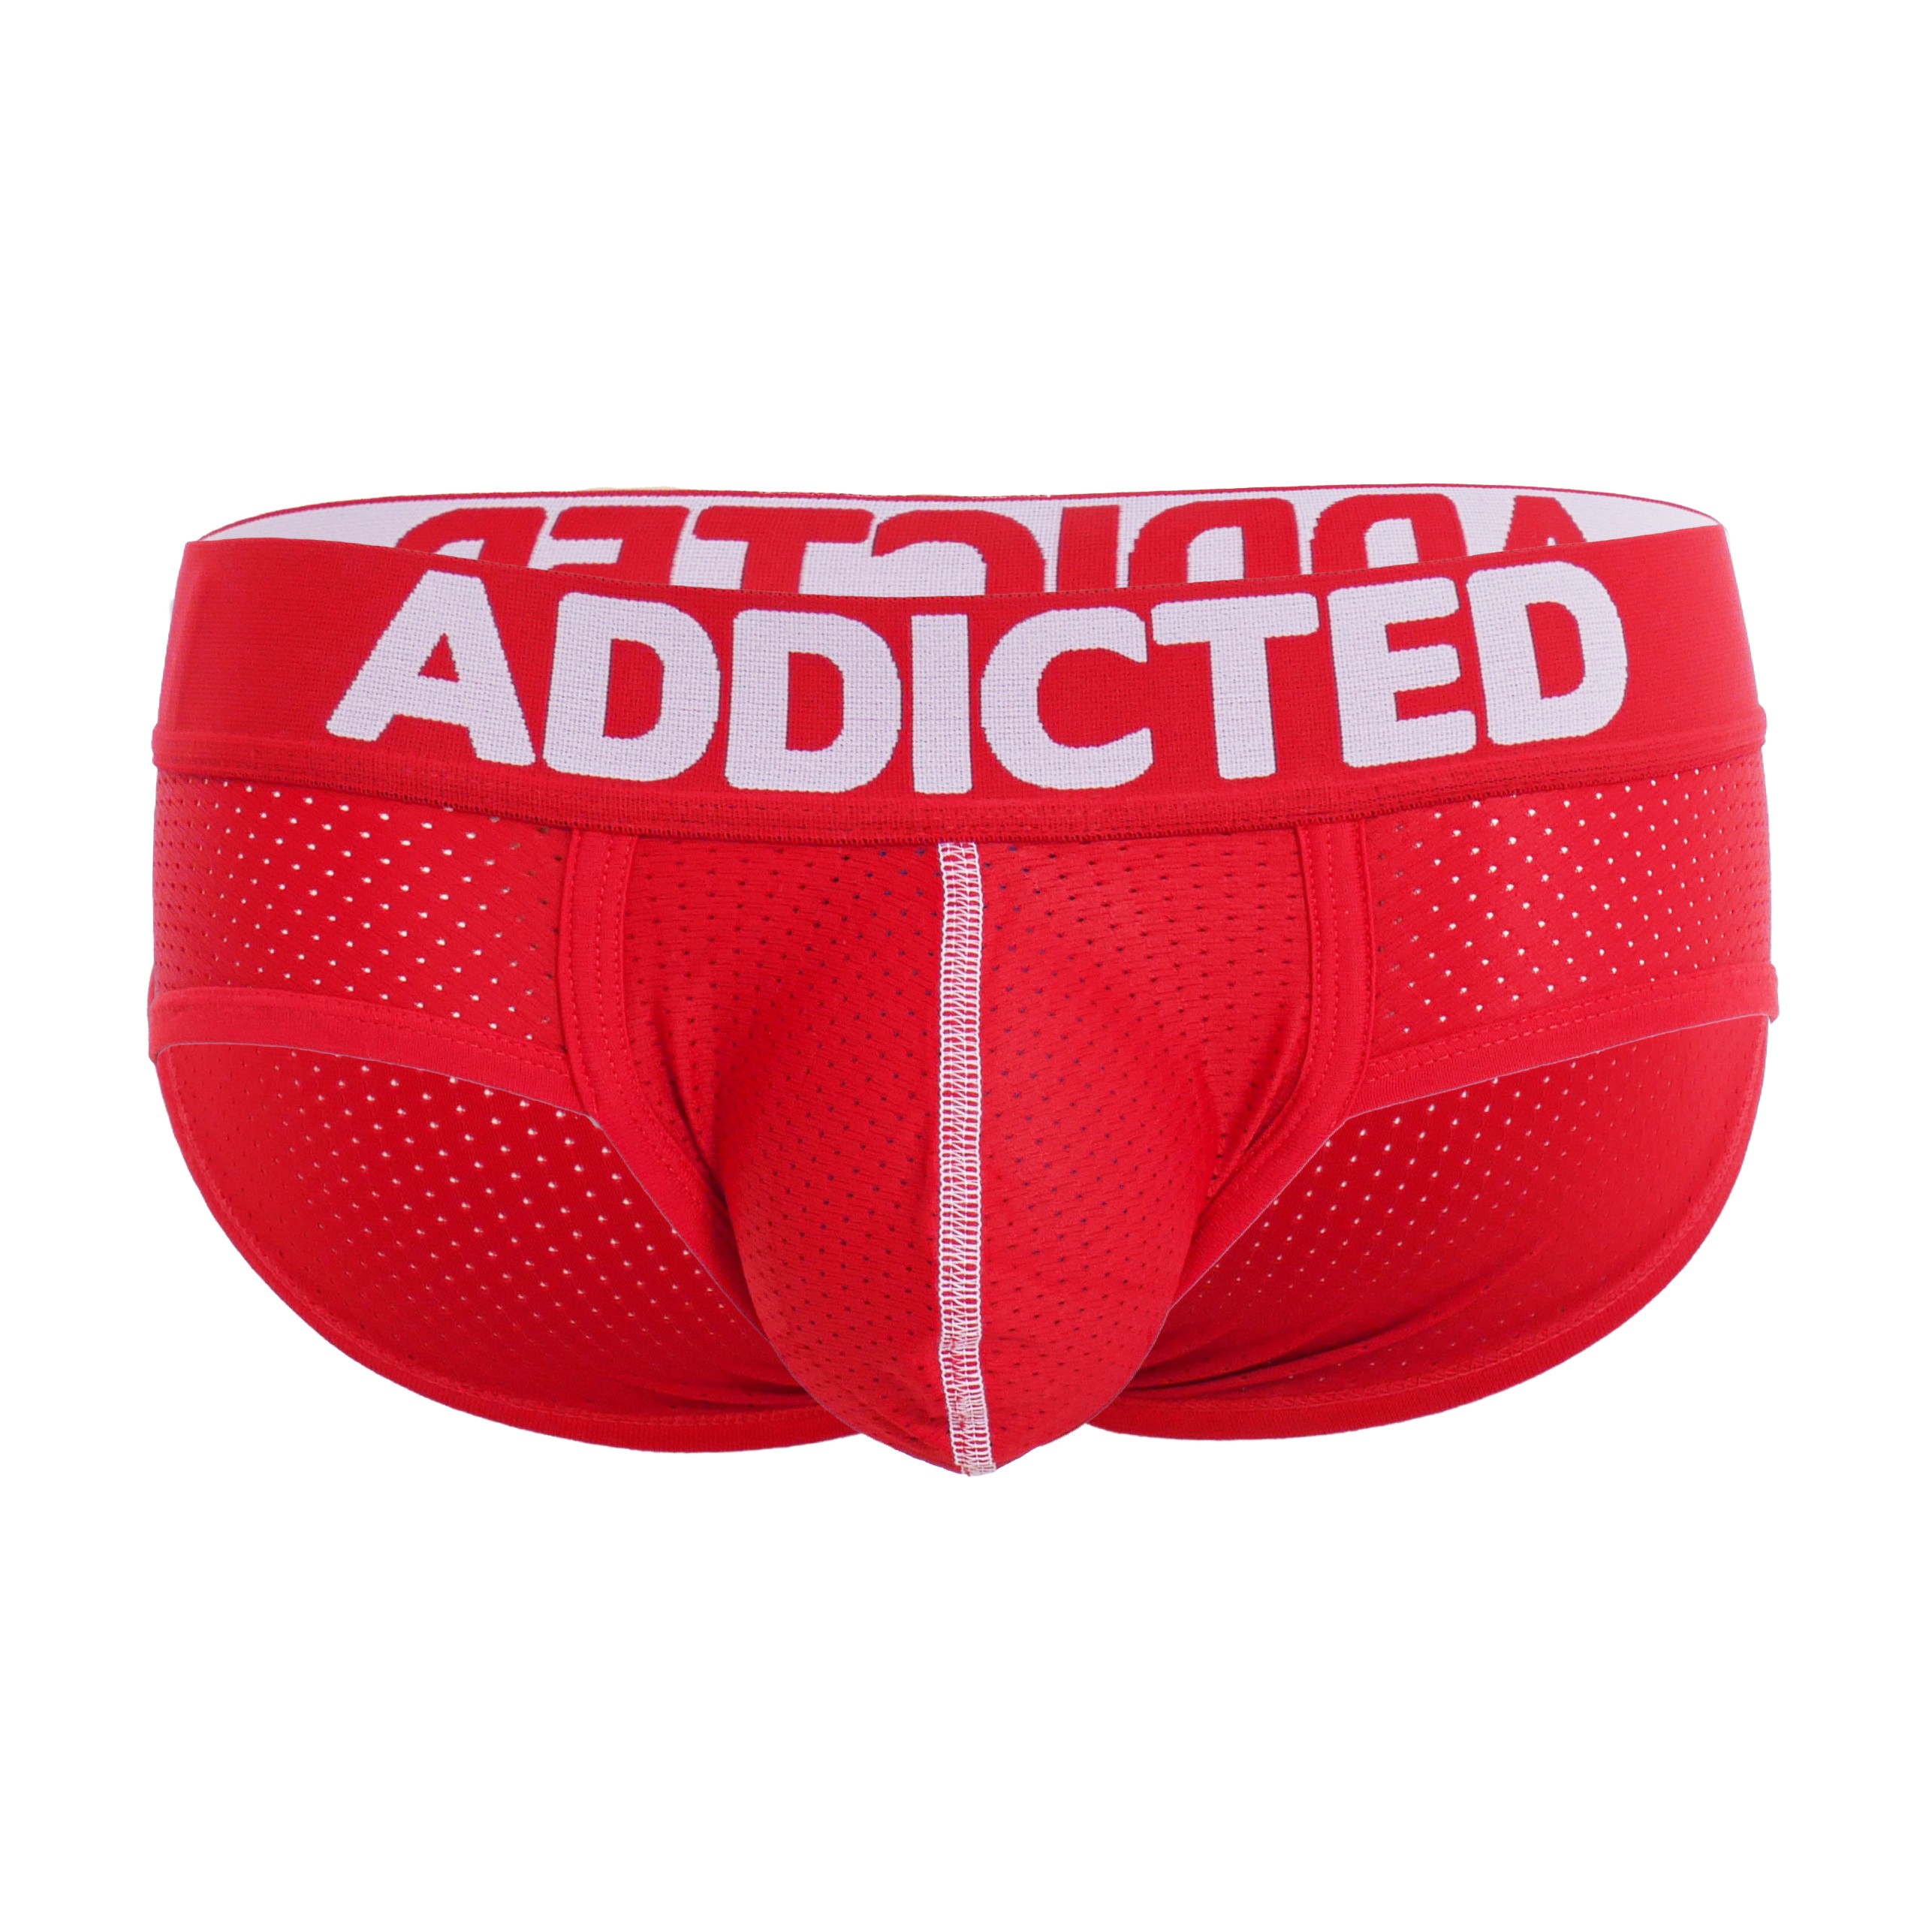 Red Push-Up Slip: Briefs for man brand ADDICTED for sale online at